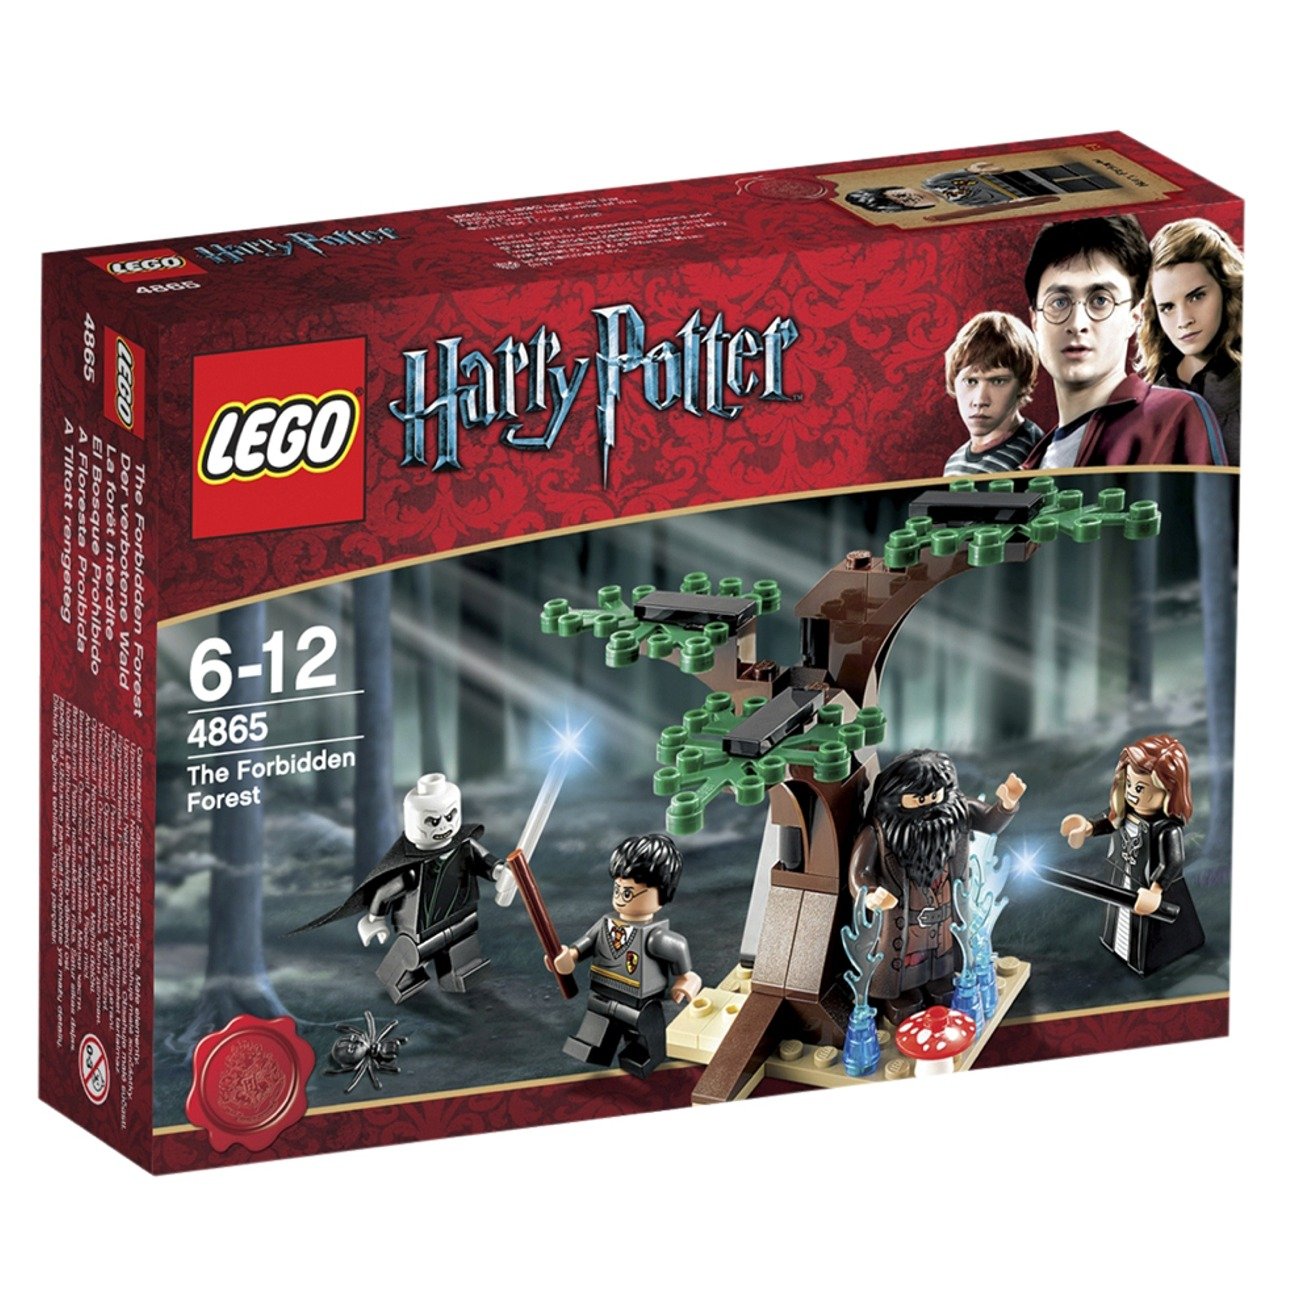 LEGO Harry Potter The Forbidden Forest 4865